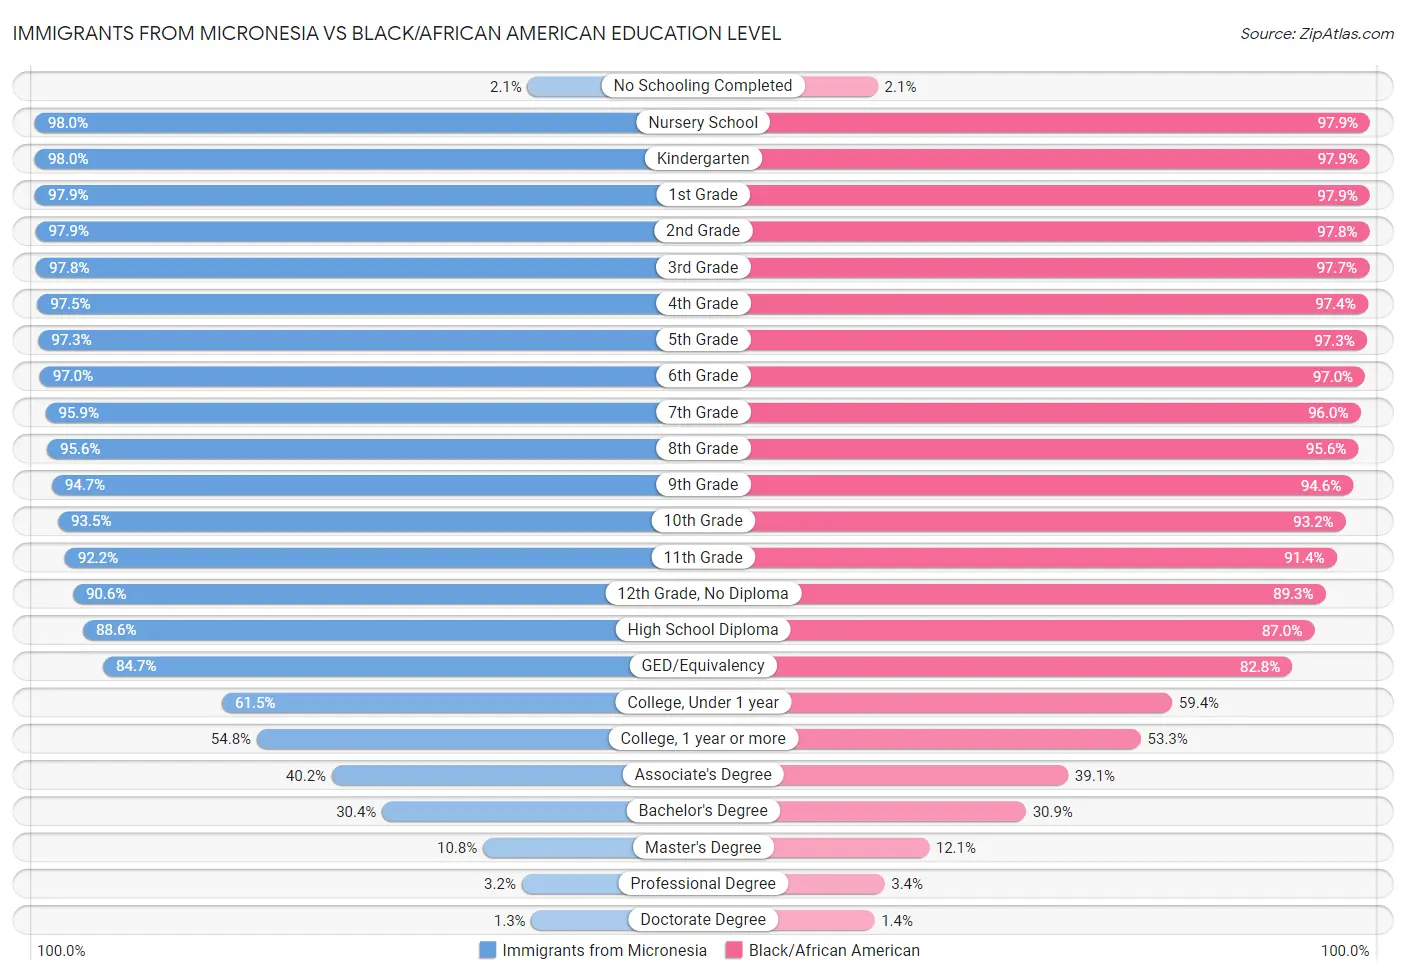 Immigrants from Micronesia vs Black/African American Education Level